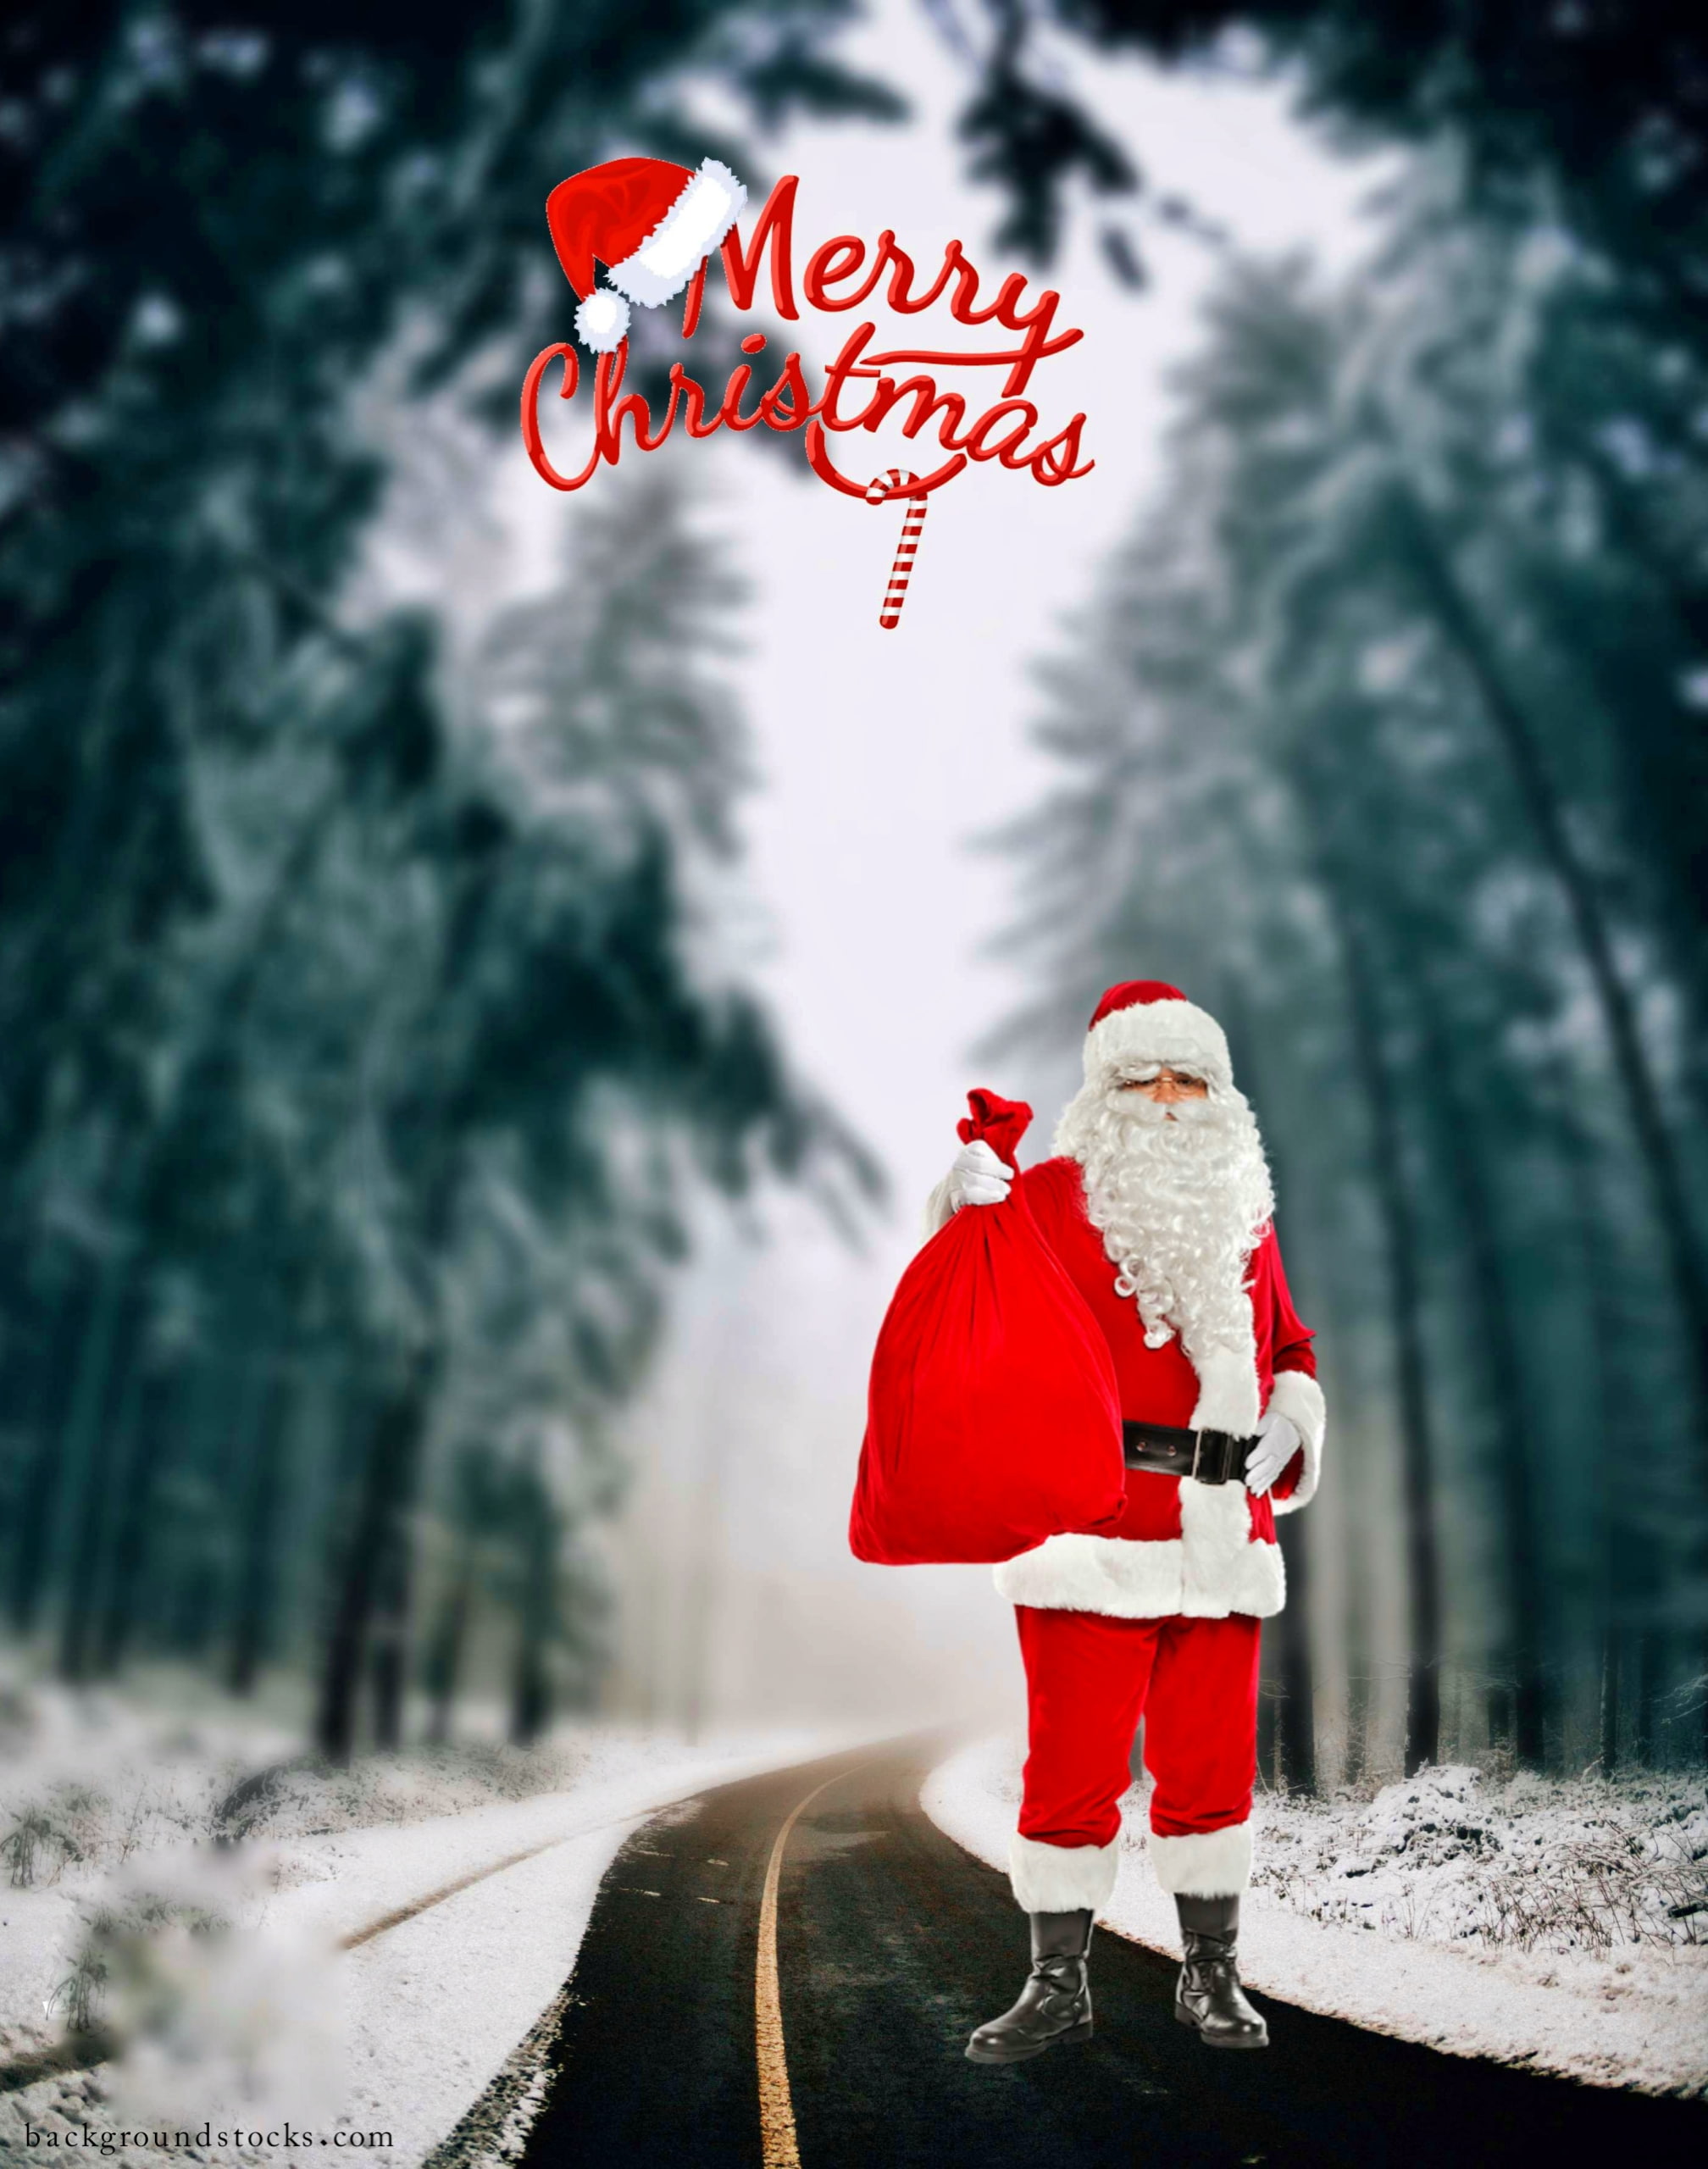 Merry Christmas Background Download 